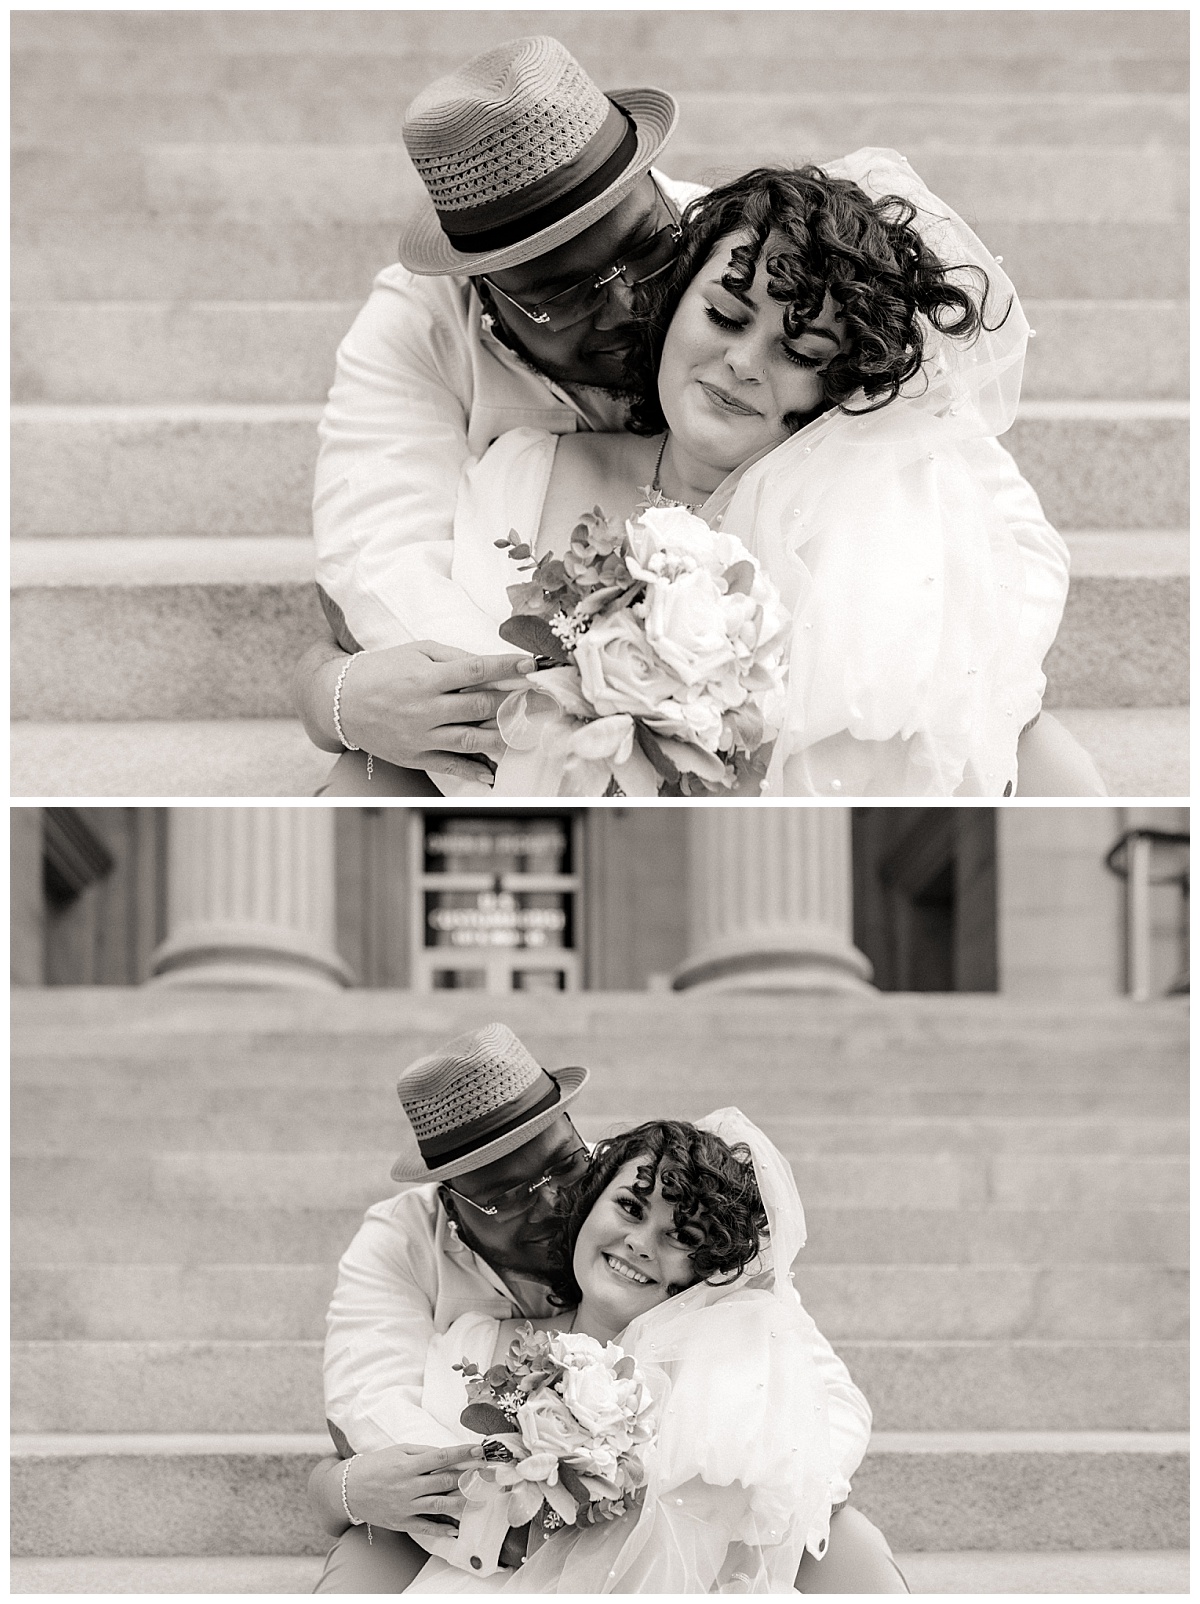 man wraps his arms around partner and leans in close by Nikki Meer Photography